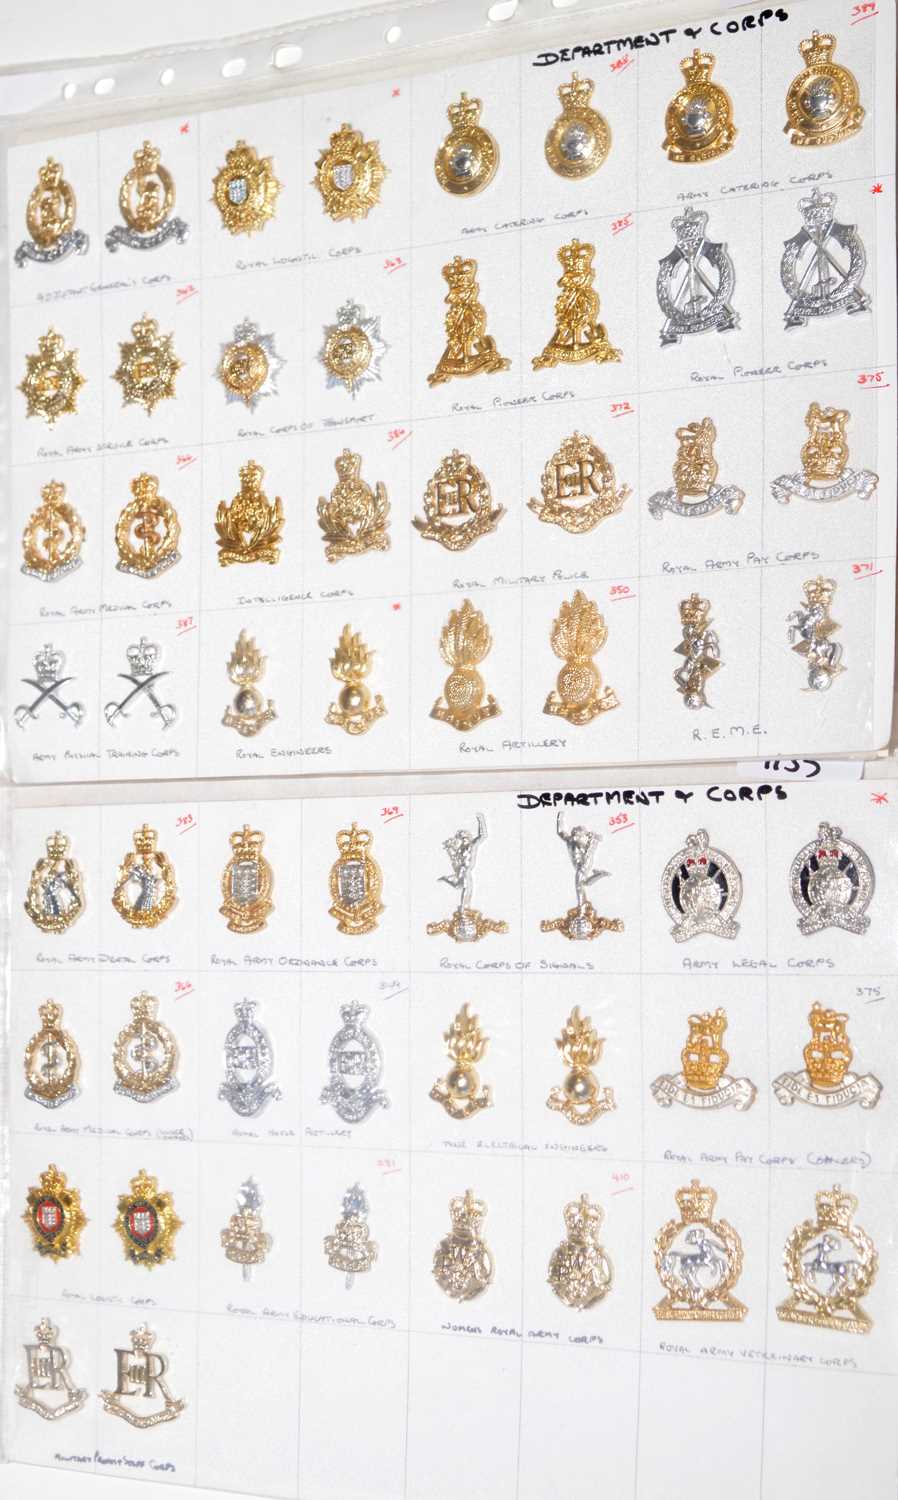 Lot 1155 - A collection of 29 pairs of Department and Corps collar badges.